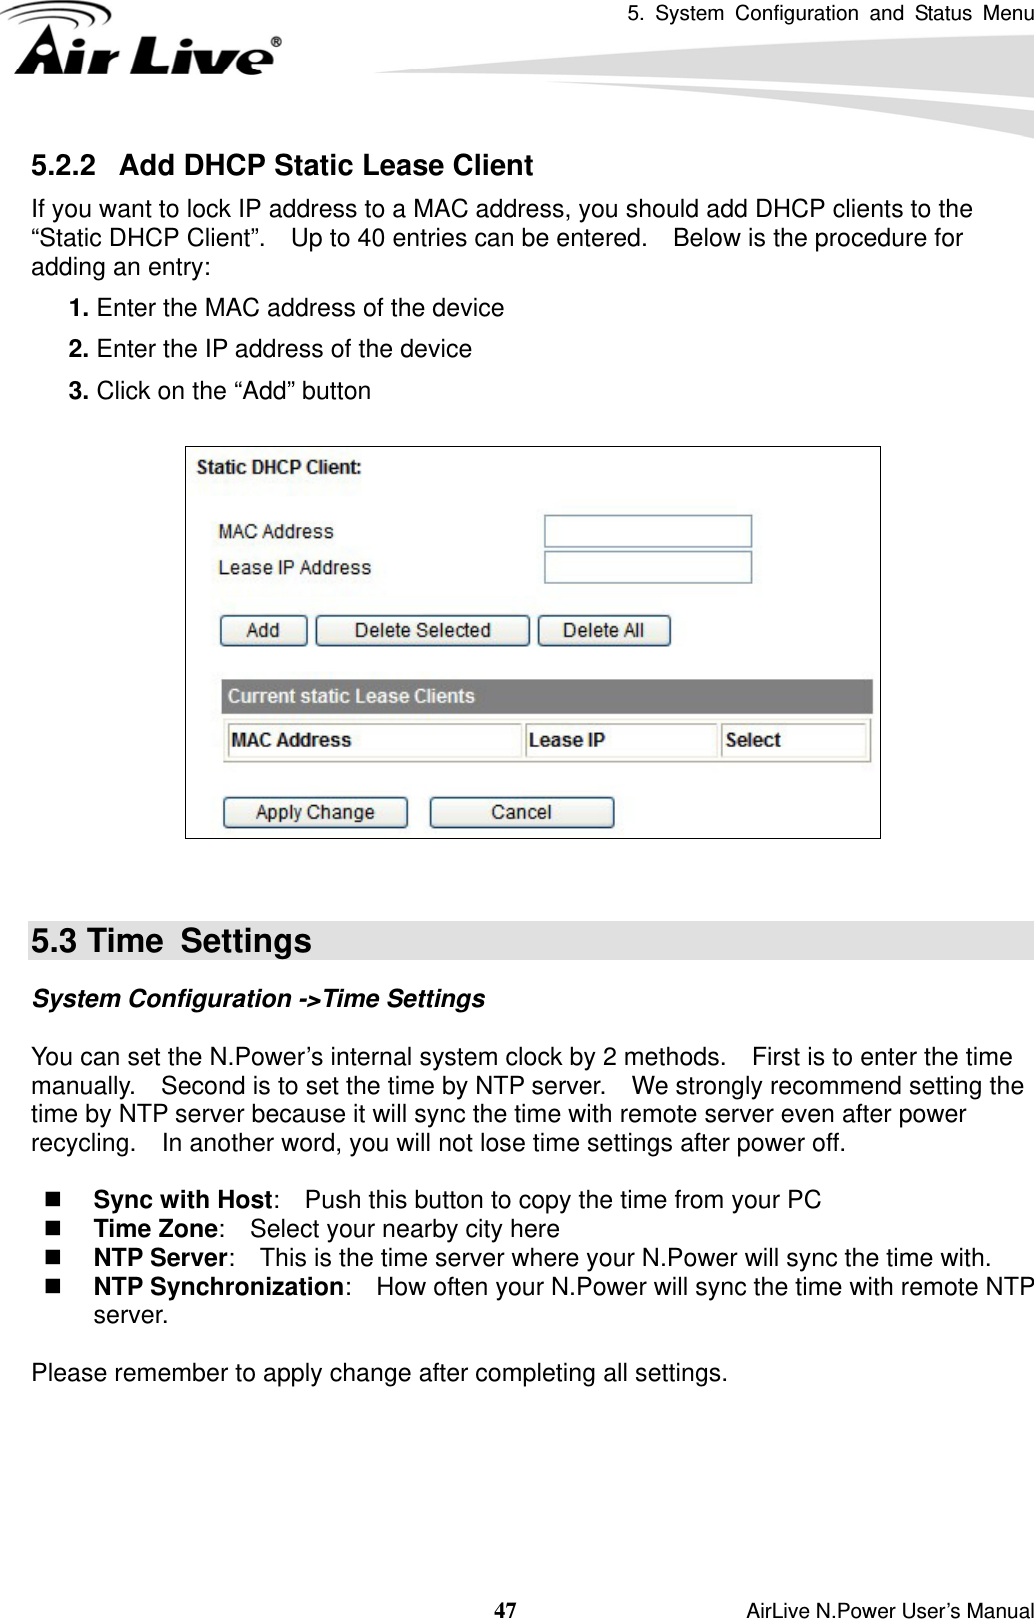 5. System Configuration and Status Menu  47                    AirLive N.Power User’s Manual 5.2.2   Add DHCP Static Lease Client If you want to lock IP address to a MAC address, you should add DHCP clients to the “Static DHCP Client”.    Up to 40 entries can be entered.    Below is the procedure for adding an entry: 5.  1. Enter the MAC address of the device 6.  2. Enter the IP address of the device 7.  3. Click on the “Add” button     5.3 Time  Settings System Configuration -&gt;Time Settings  You can set the N.Power’s internal system clock by 2 methods.    First is to enter the time manually.    Second is to set the time by NTP server.    We strongly recommend setting the time by NTP server because it will sync the time with remote server even after power recycling.    In another word, you will not lose time settings after power off.   Sync with Host:    Push this button to copy the time from your PC  Time Zone:    Select your nearby city here  NTP Server:    This is the time server where your N.Power will sync the time with.  NTP Synchronization:    How often your N.Power will sync the time with remote NTP server.    Please remember to apply change after completing all settings. 